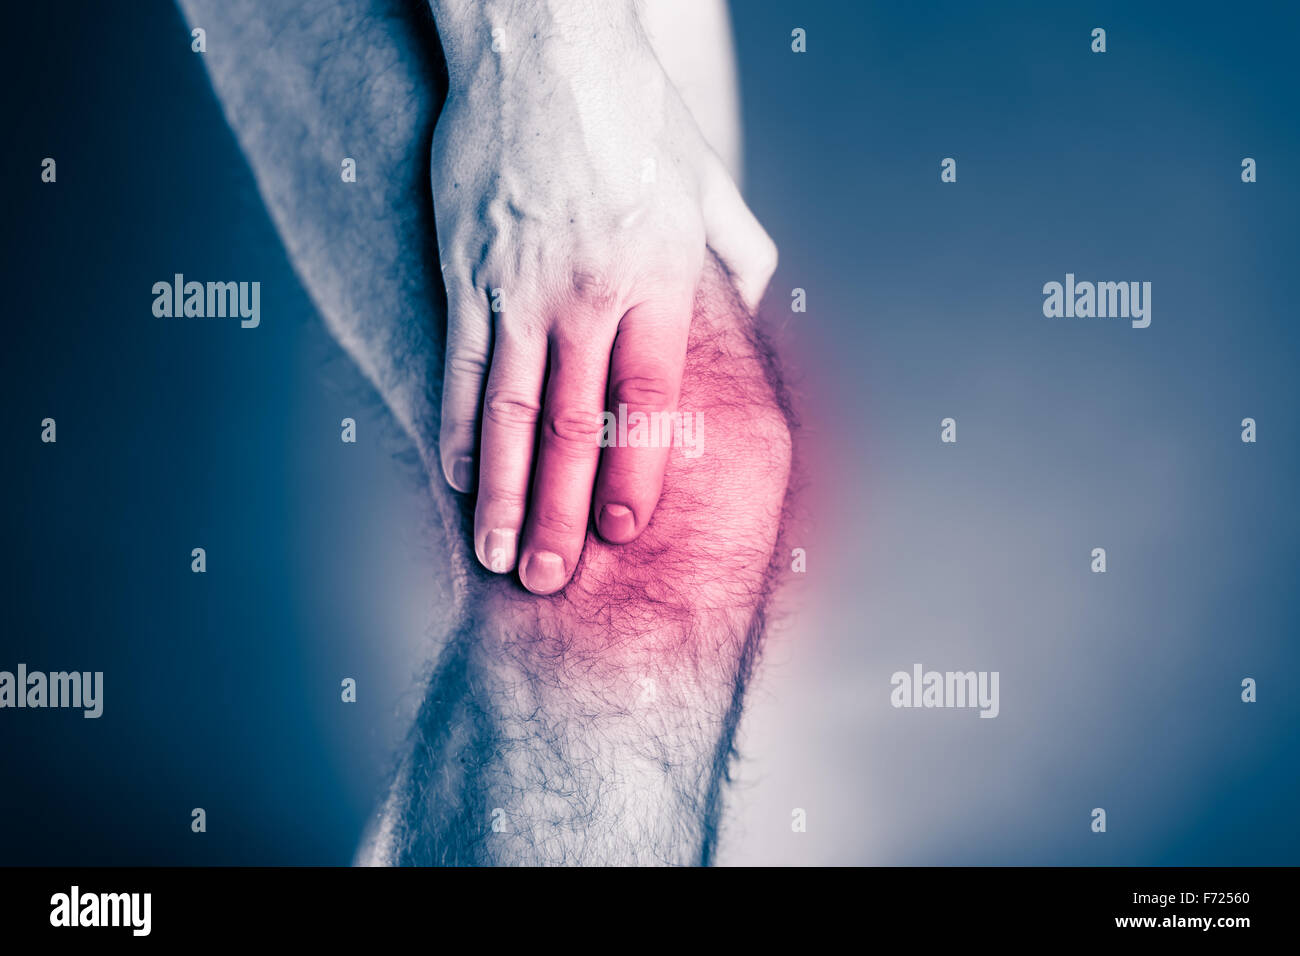 Knee pain, physical injury. Male leg and muscle pain from running or training, sport physical injuries when working out. Stock Photo